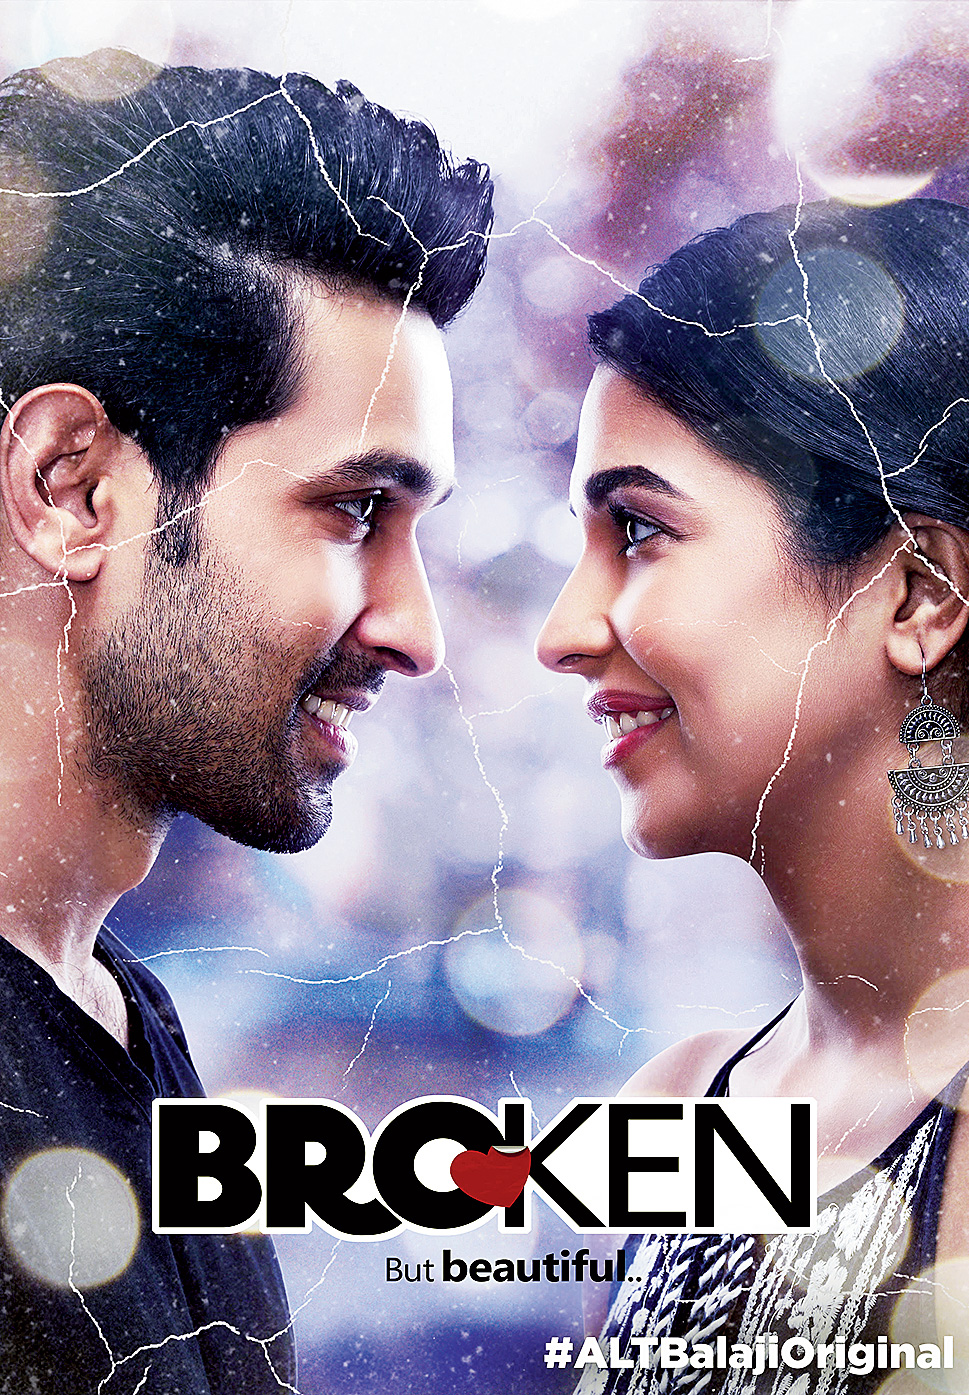 Broken But Beautiful Scores With Its Focus On Love 2 0 Telegraph India